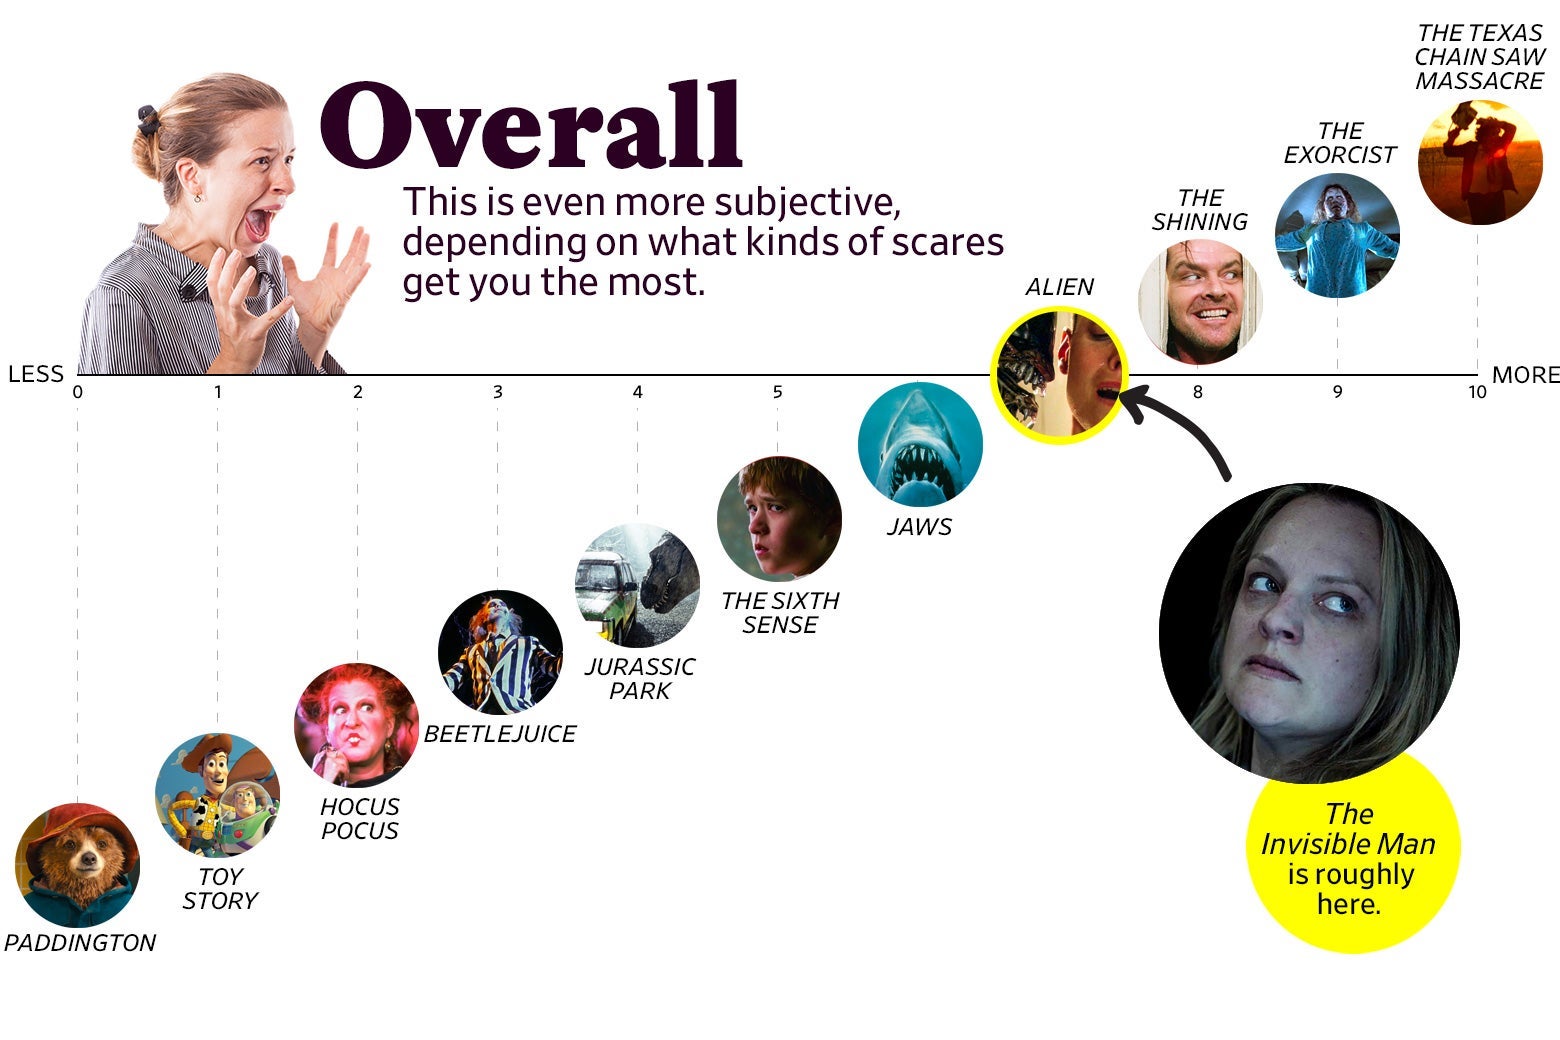 A chart titled “Overall: This is even more subjective, depending on what kinds of scares get you the most” shows that The Invisible Man ranks as a 7 overall, roughly the same as Alien. The scale ranges from Paddington (0) to the original Texas Chain Saw Massacre (10).